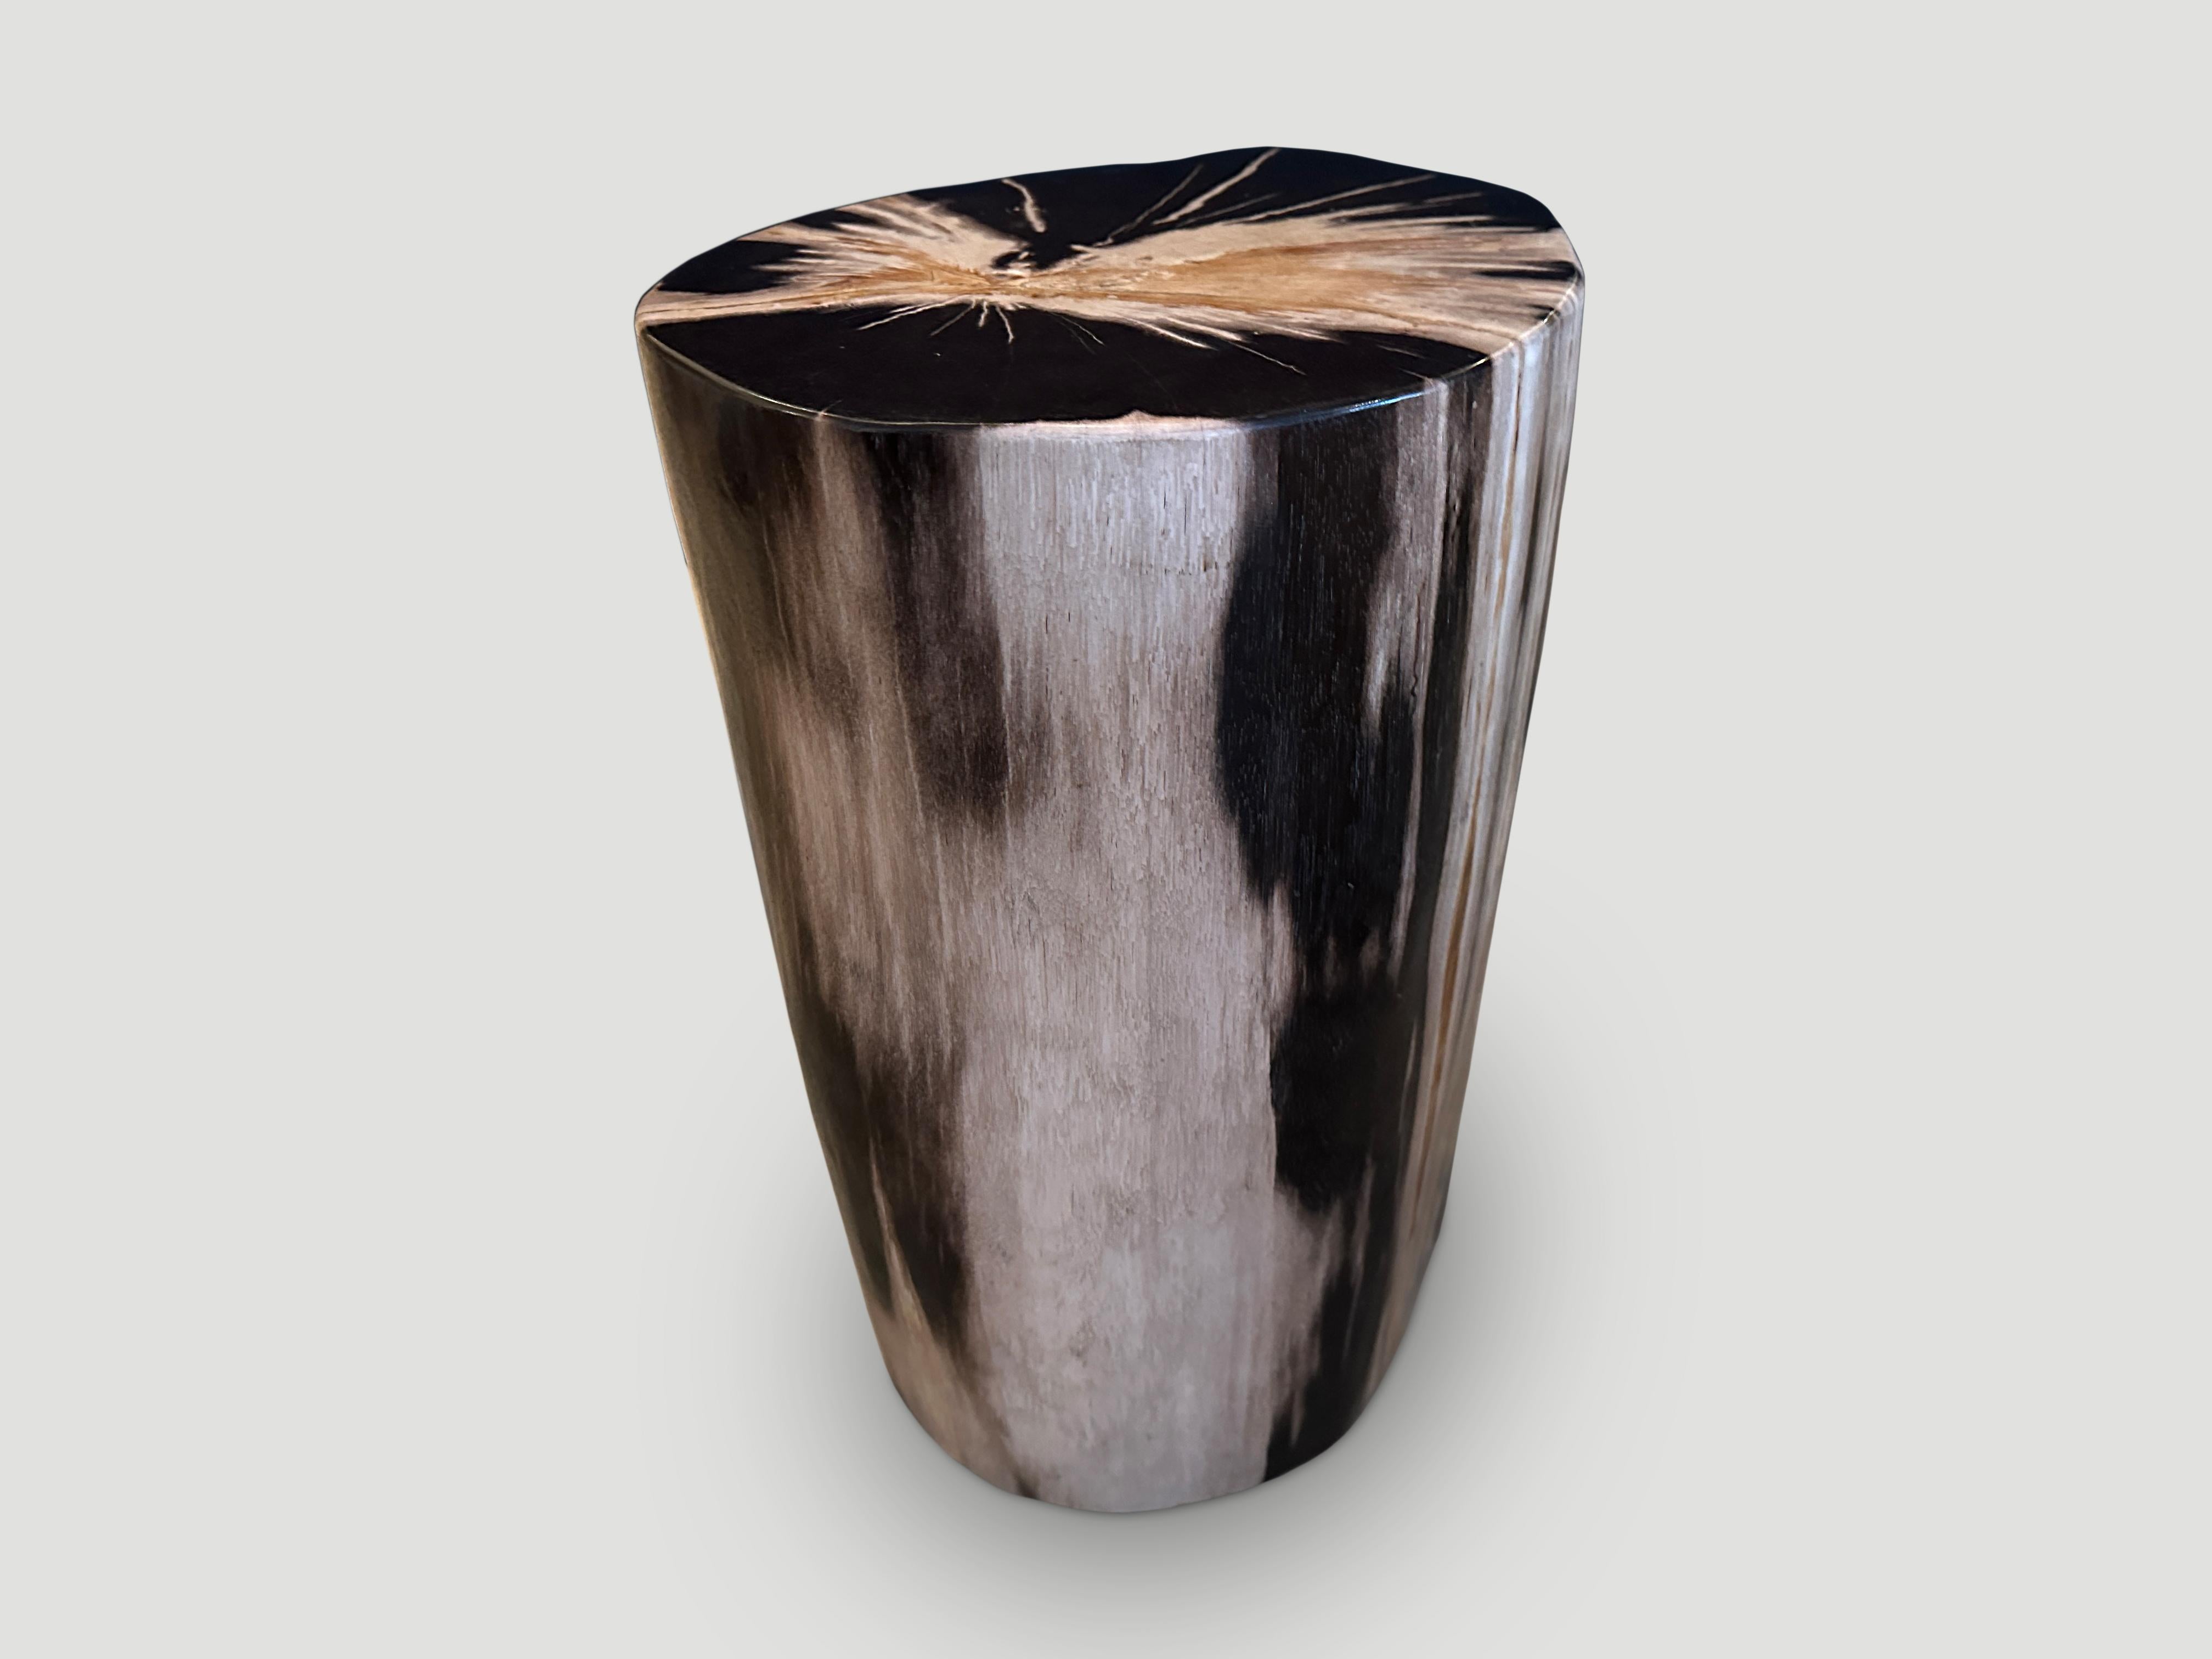 Beautiful contrasting tones and markings on this high quality super smooth petrified wood side table. It’s fascinating how Mother Nature produces these stunning 40 million year old petrified teak logs with such contrasting colors and natural